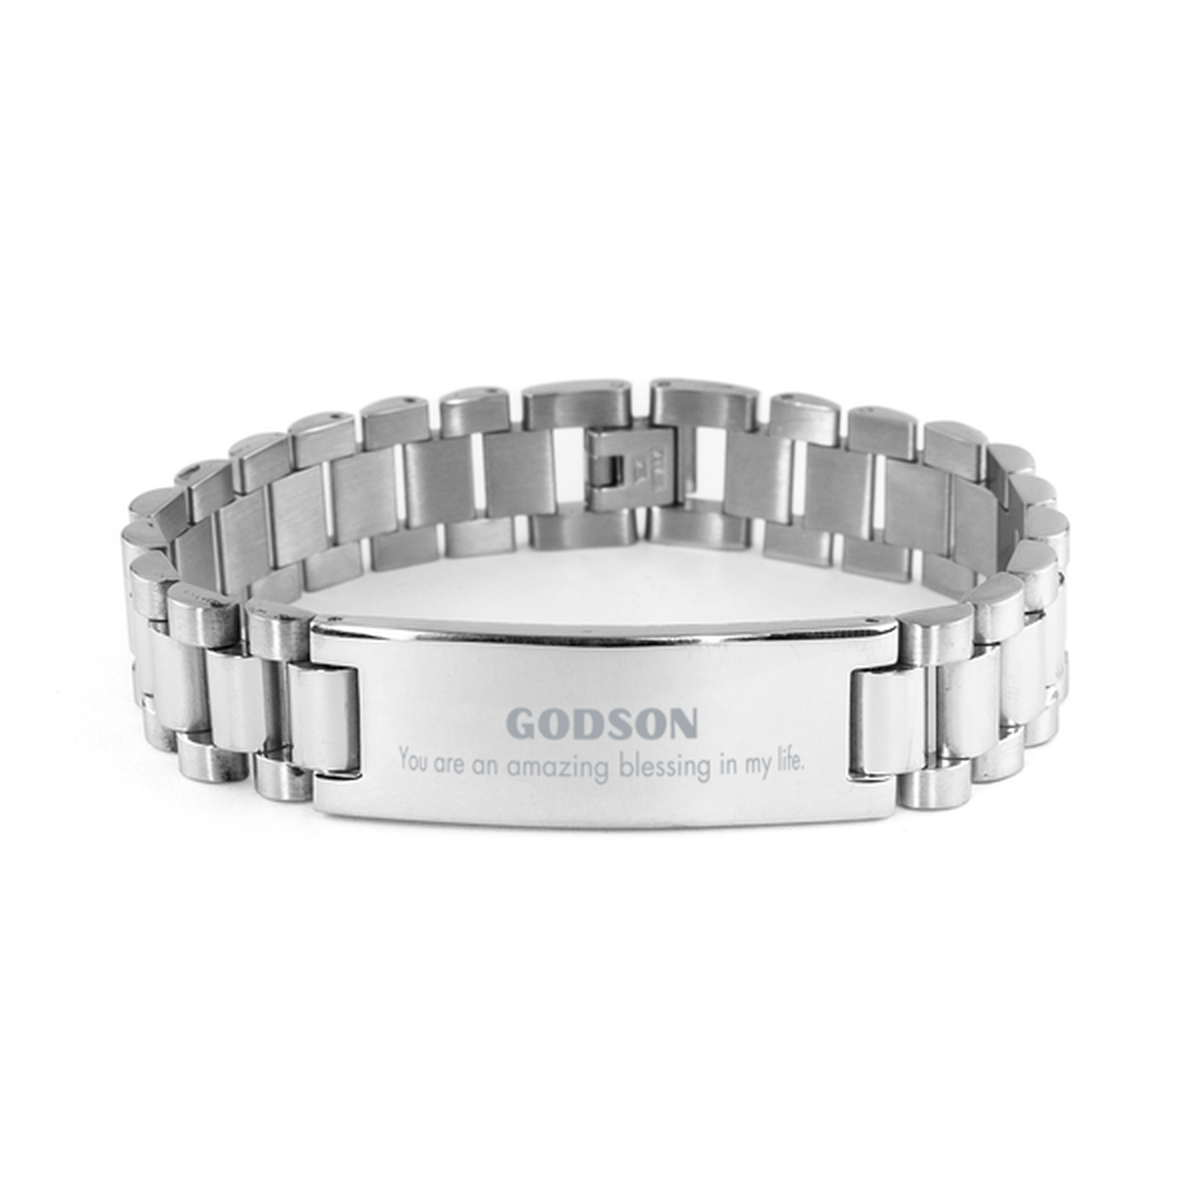 Godson Ladder Stainless Steel Bracelet, You are an amazing blessing in my life, Thank You Gifts For Godson, Inspirational Birthday Christmas Unique Gifts For Godson